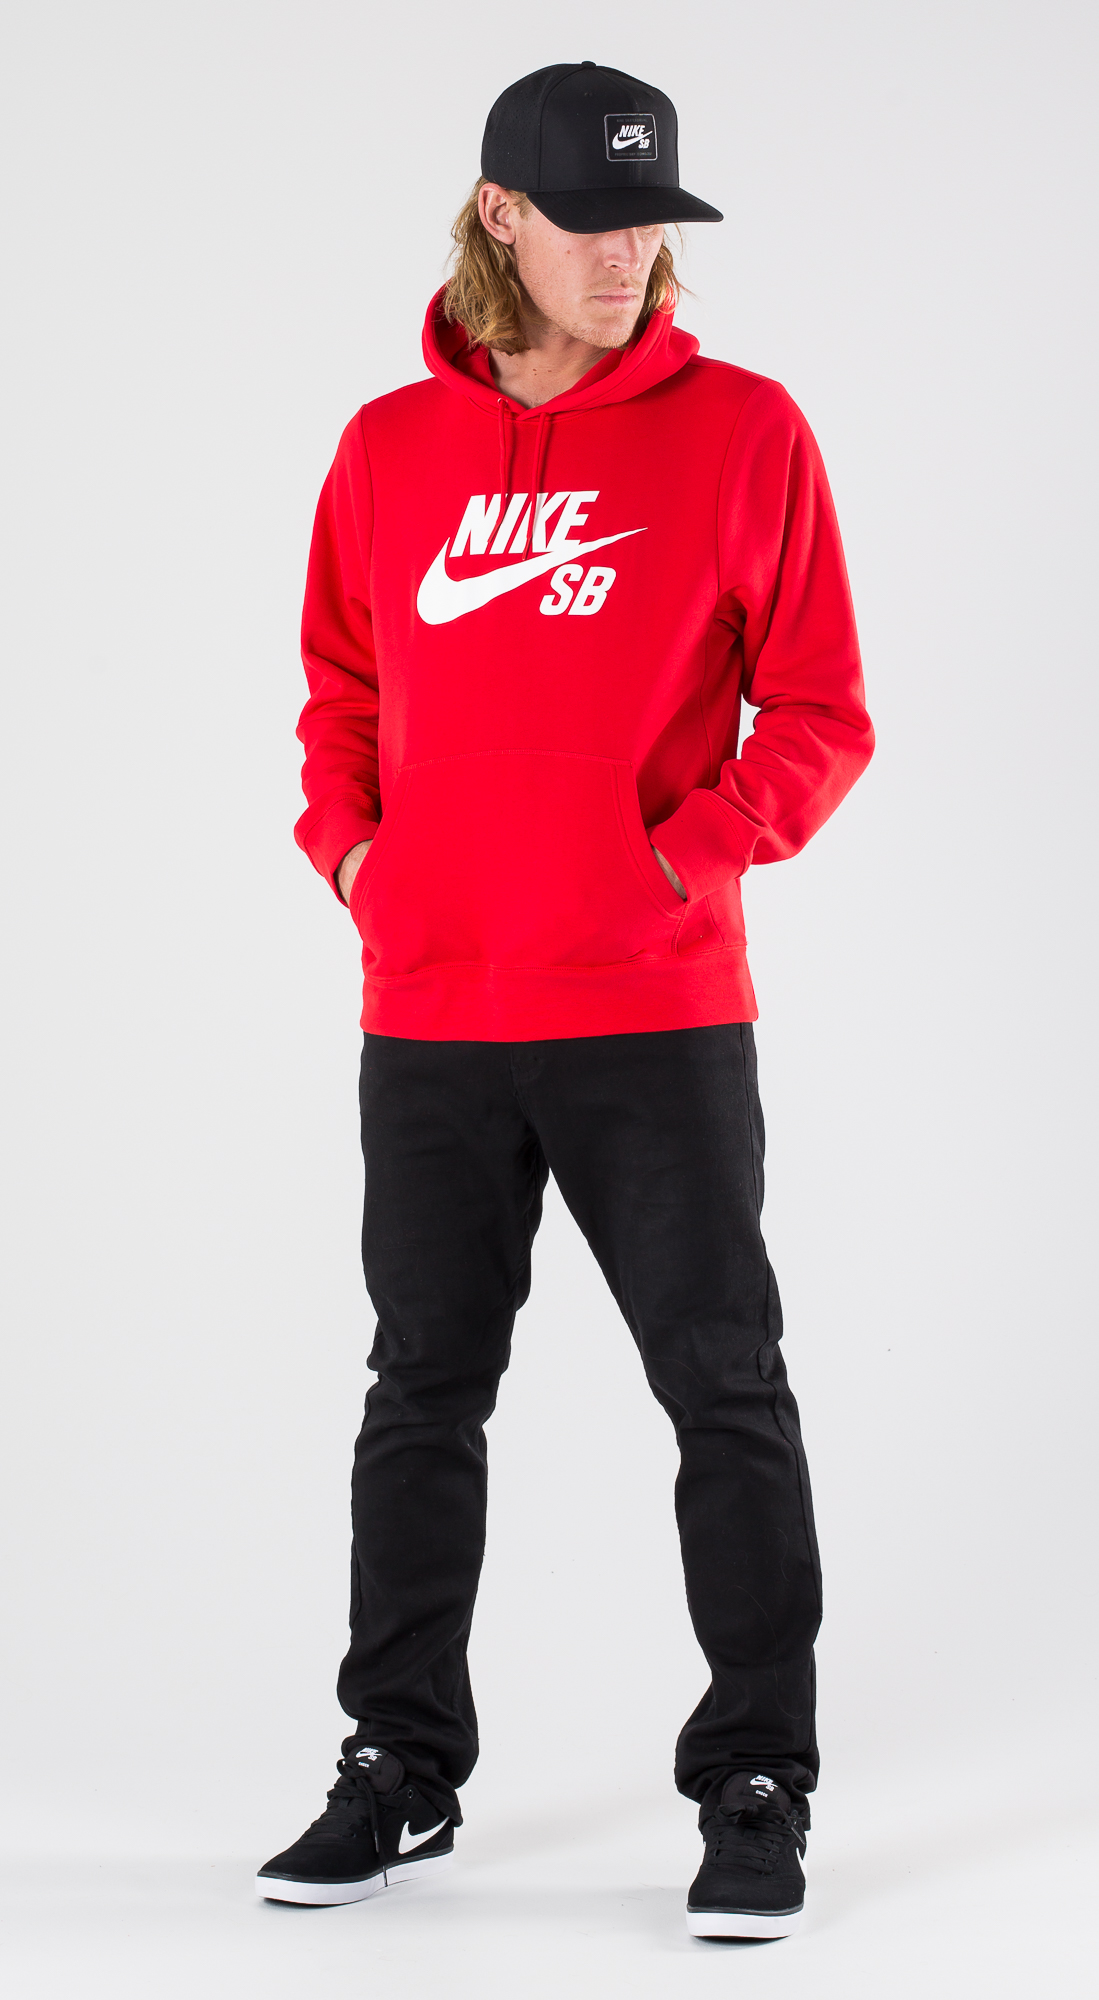 red and white nike outfit